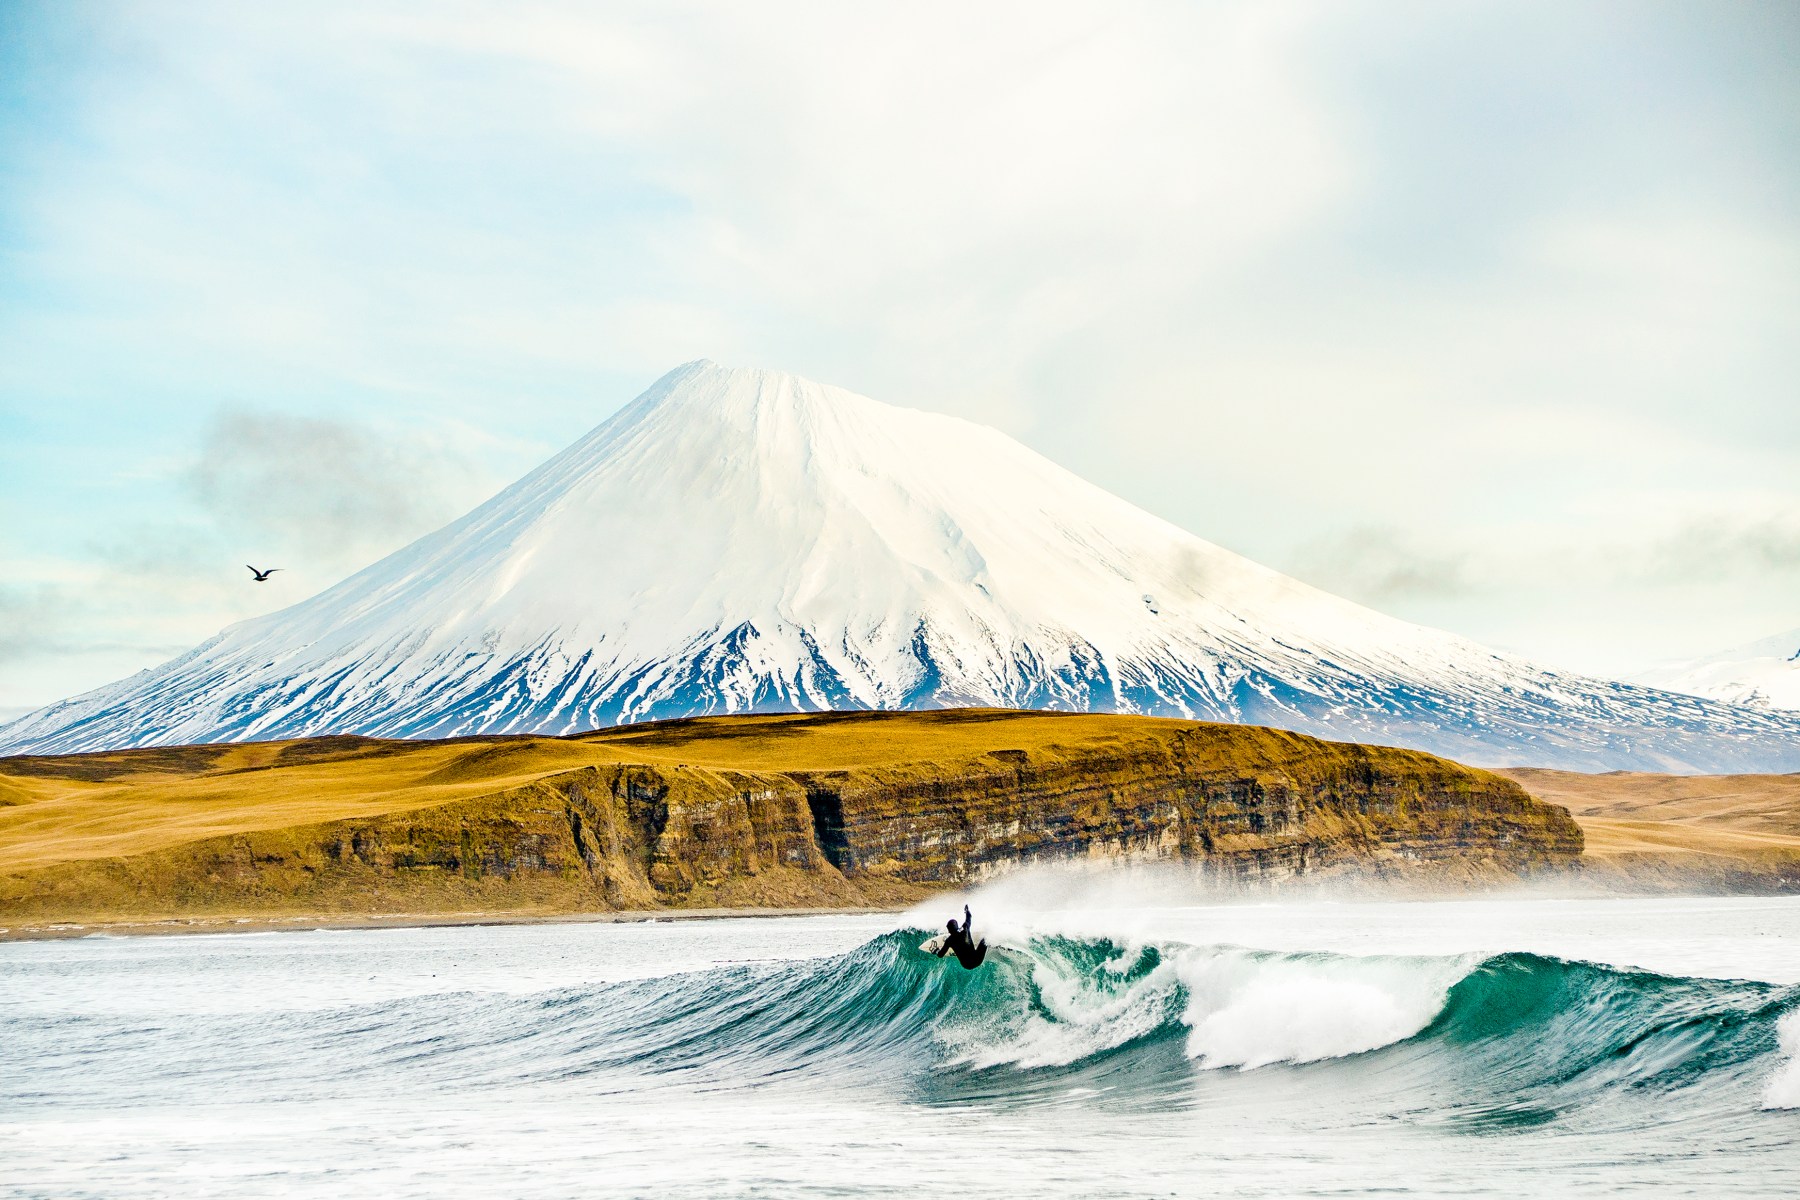 This is Josh Mulcoy in the Aleutian Islands, this remote island chain that basically extends from Russia to Alaska. It’s a wild place and a place I'd always dreamt of going to for years. I finally went a few years ago and shot an article for <em>SURFER Magazine</em>. This photo is critical to me in my career because it speaks volumes about how hard you work to get to these places. Oftentimes you go and the weather sucks or the waves aren't good and it just doesn't work out how you planned. In this situation, it did and everything came to life. Surfing and finding good waves in remote areas is still very much at the core of what I love and this photograph in that place with the clearing sky was a big moment in my career. We saw the volcano maybe one more day, but that was the clearest, best day of photographing we had. It’s a moment that sits with me in my memory bank and in the archive.